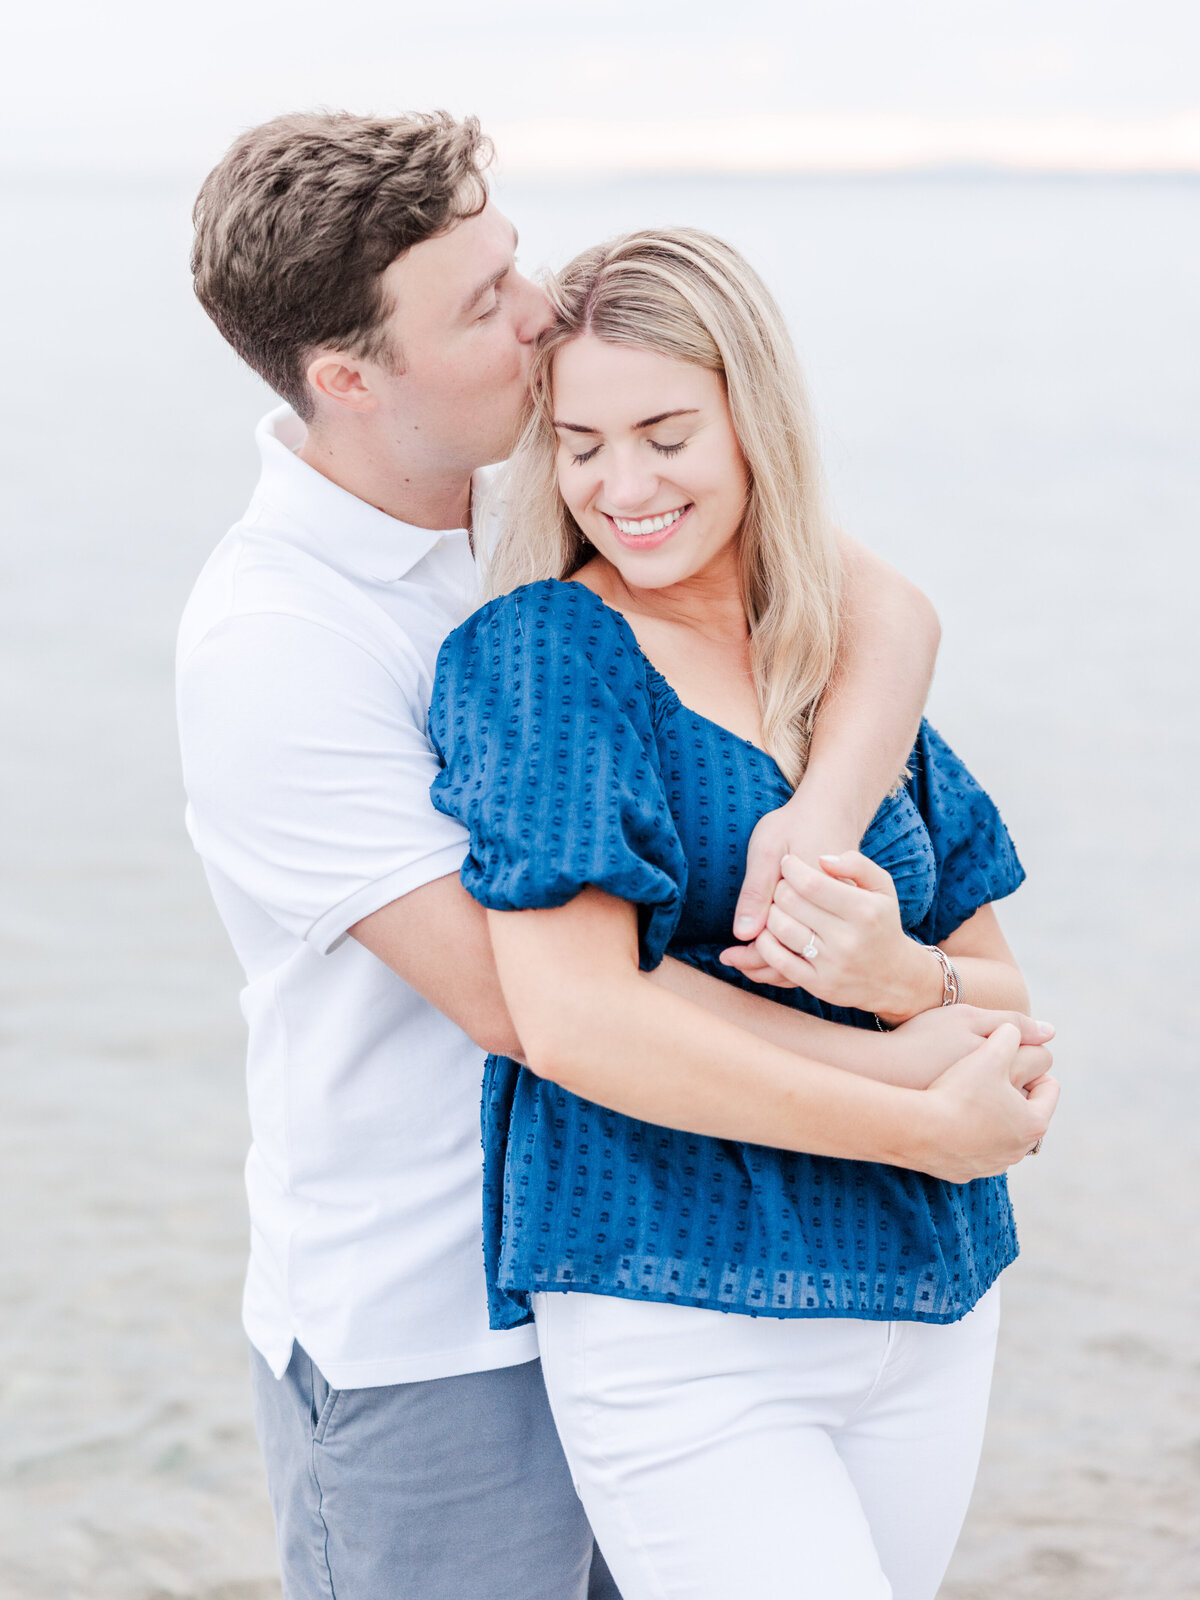 christine-antonio-engagement-session-eolia-mansion-harkness-park-waterford-ct-135